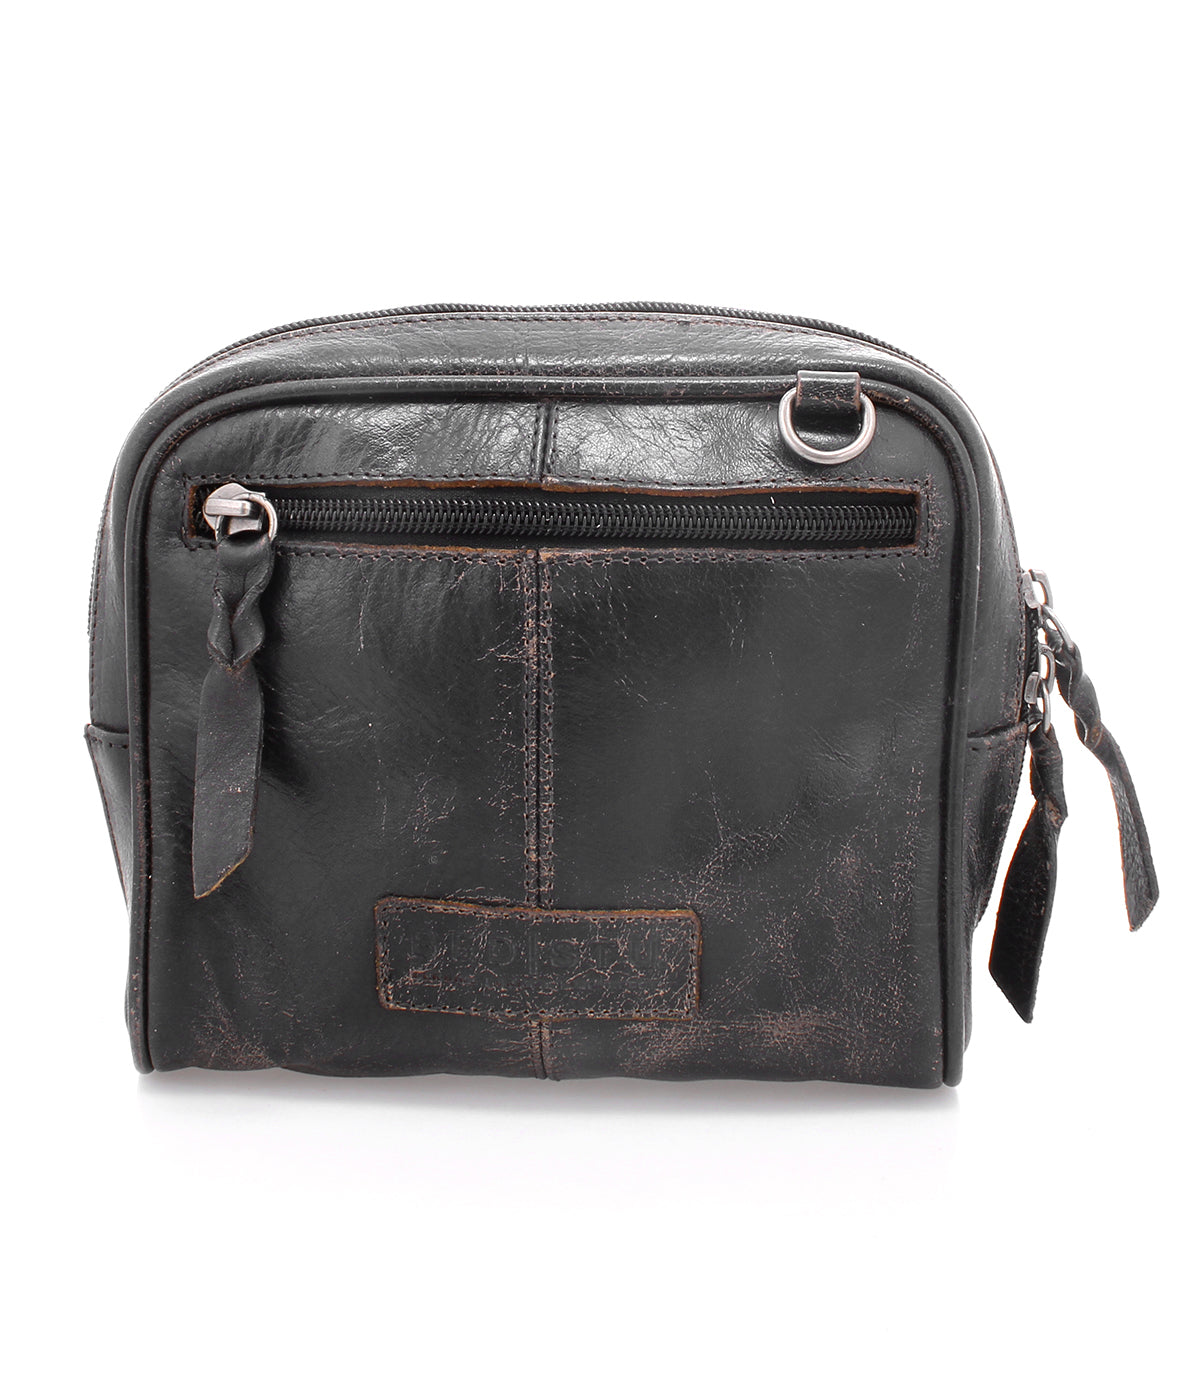 A handcrafted black leather Capture cosmetic bag with a zipper by Bed Stu.